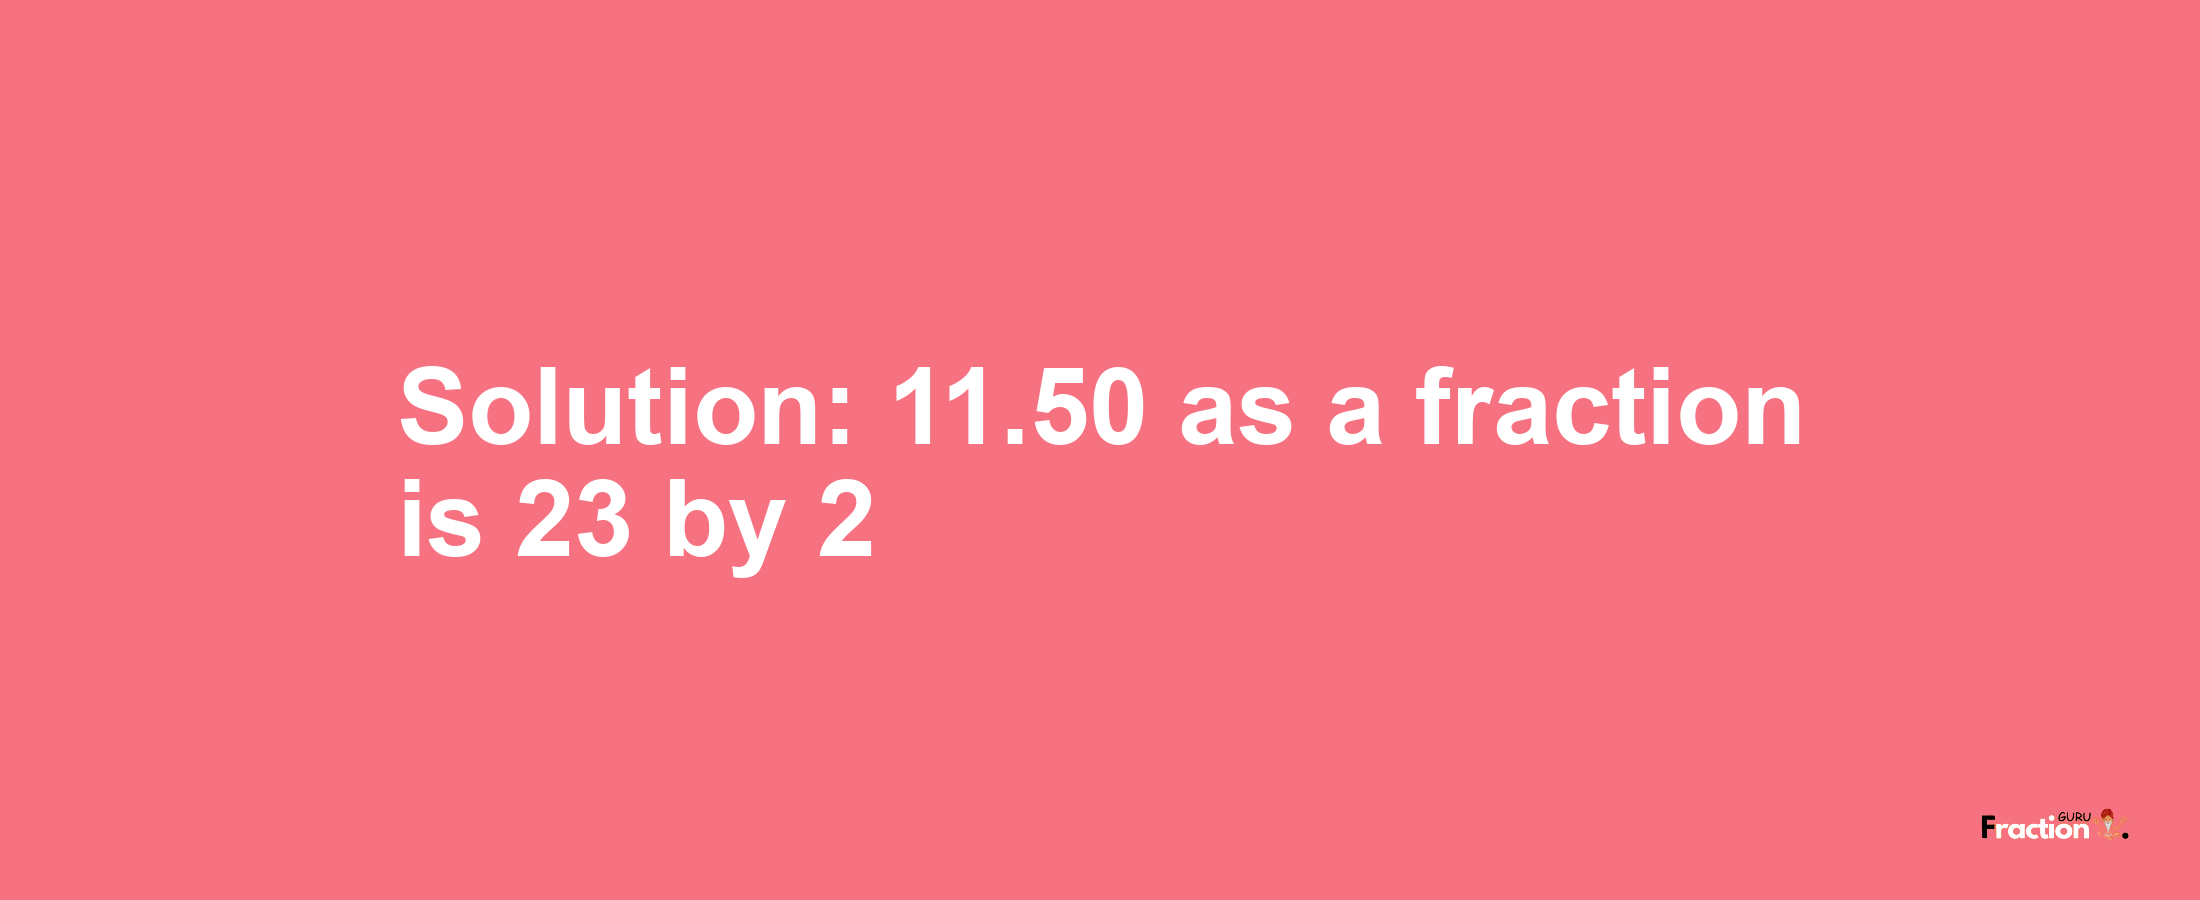 Solution:11.50 as a fraction is 23/2